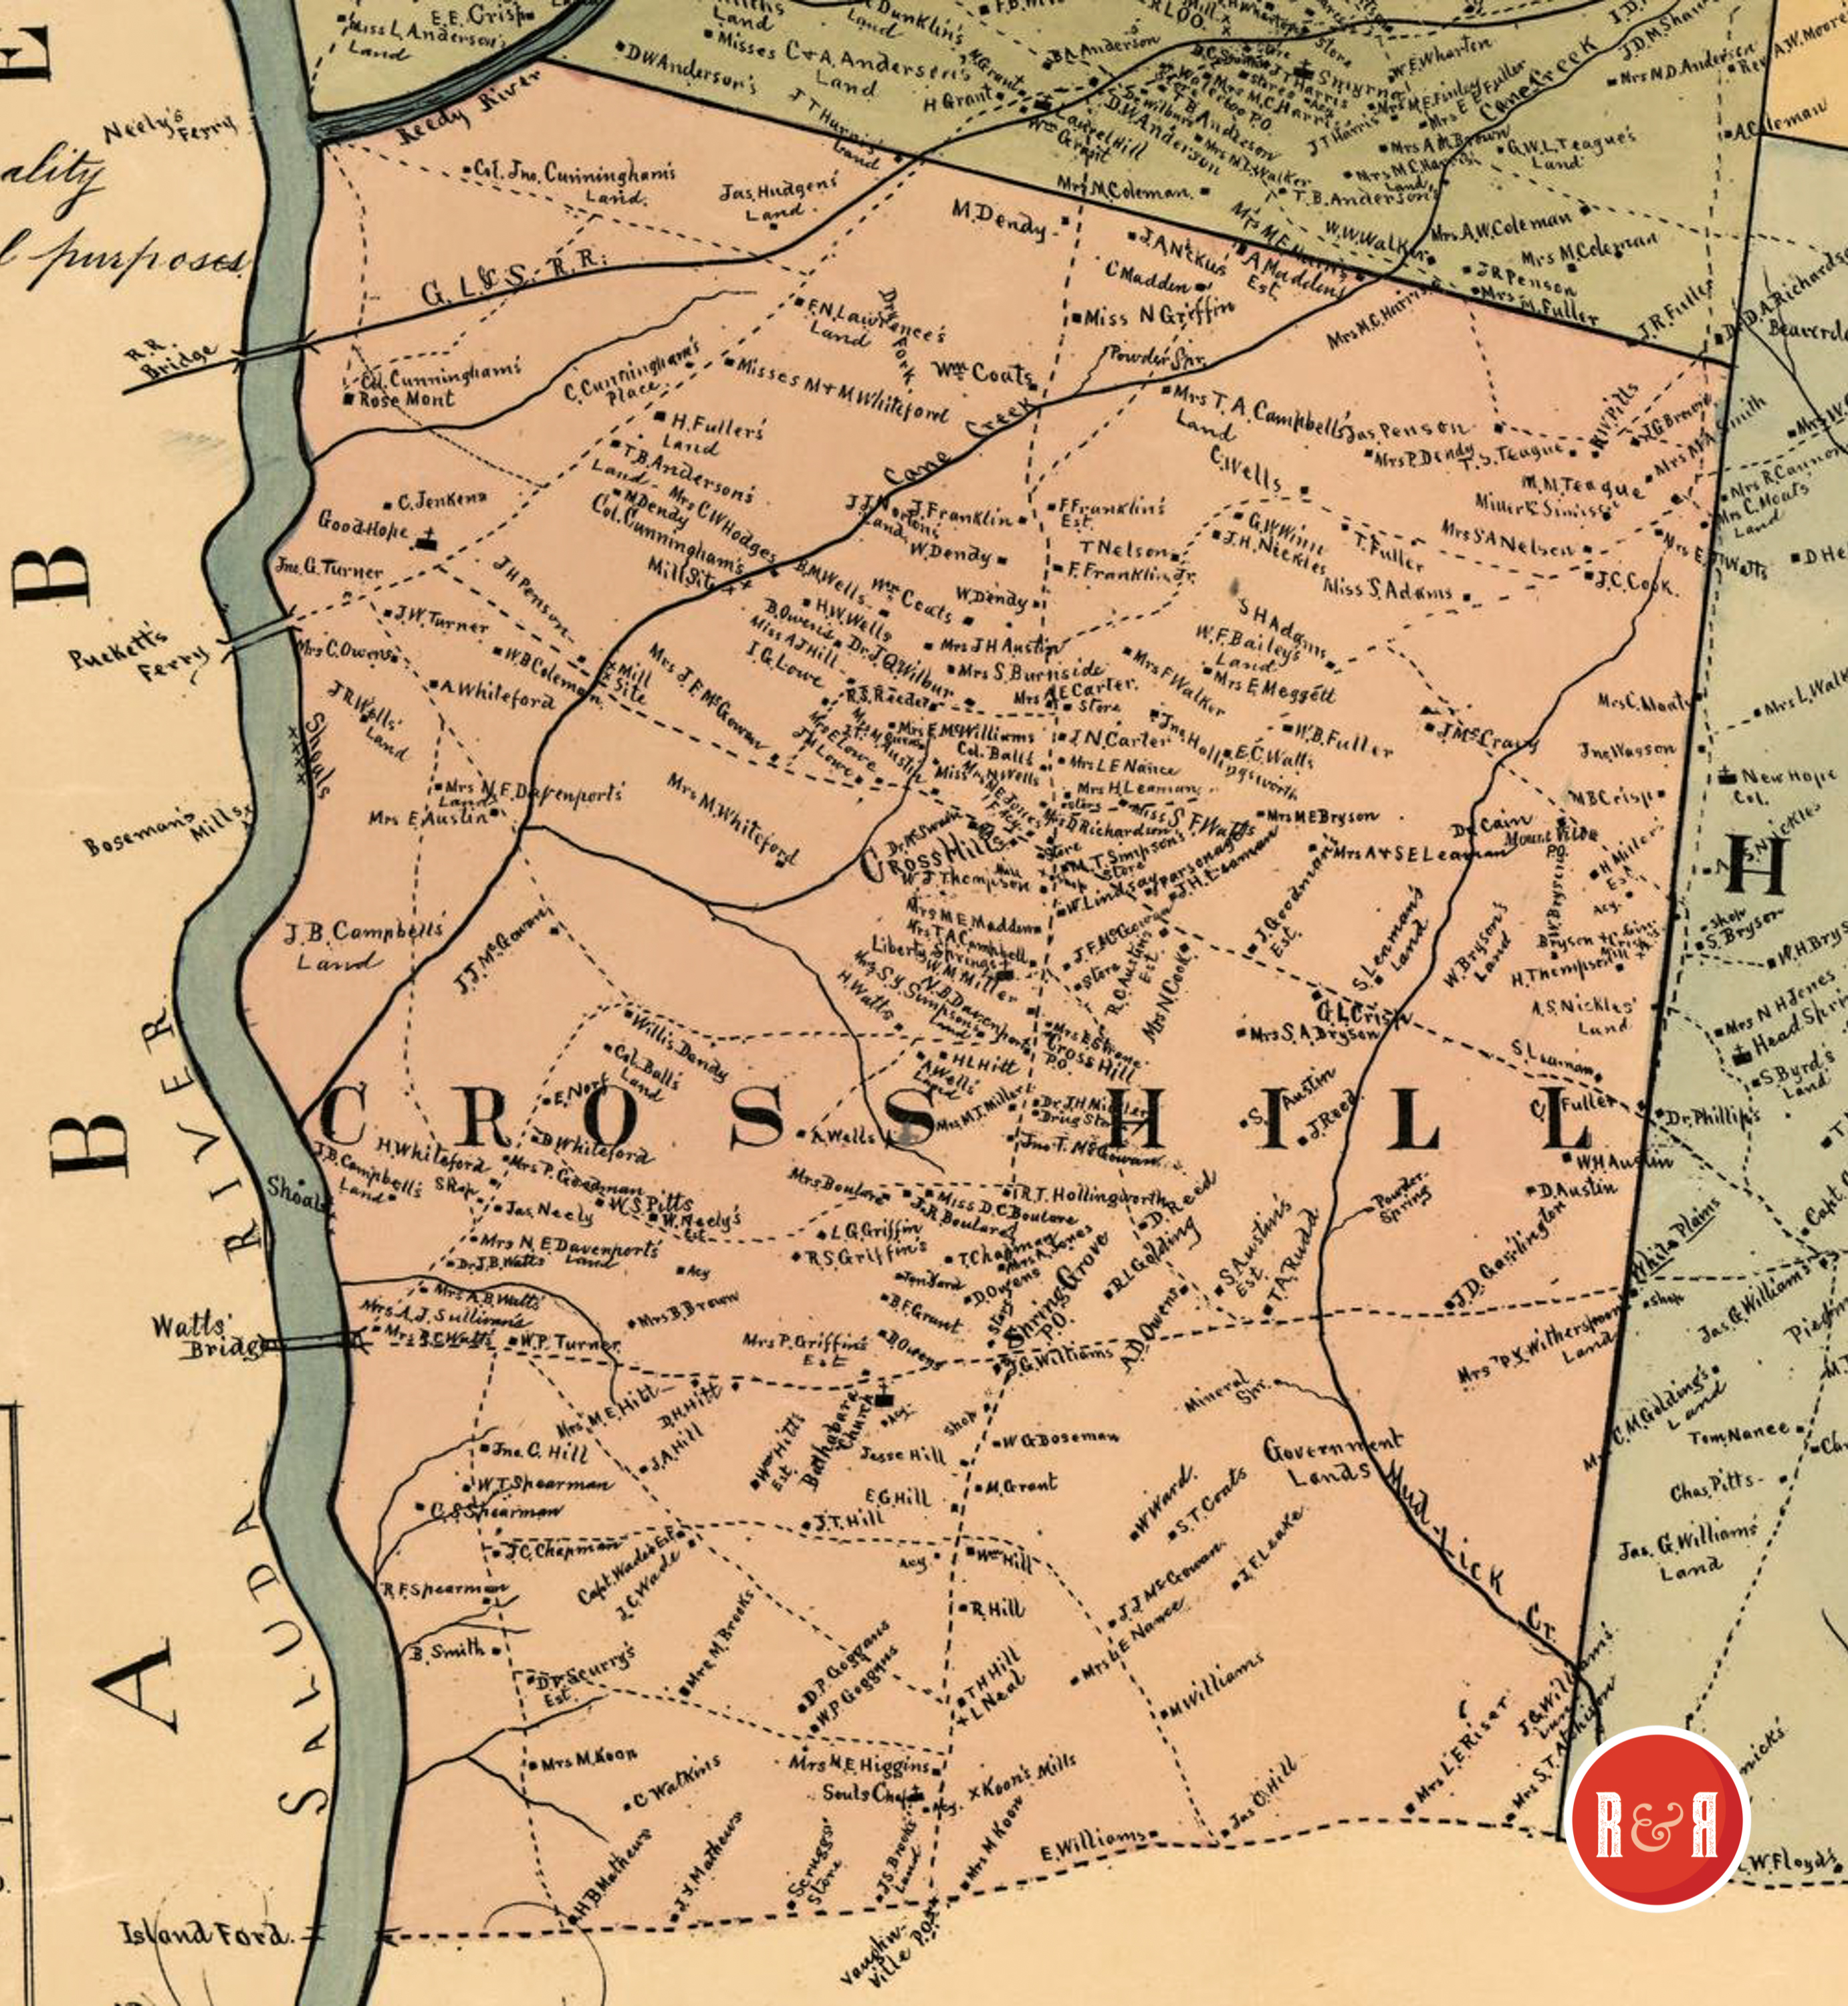 CROSS HILL TOWNSHIP MAP - ENLARGED